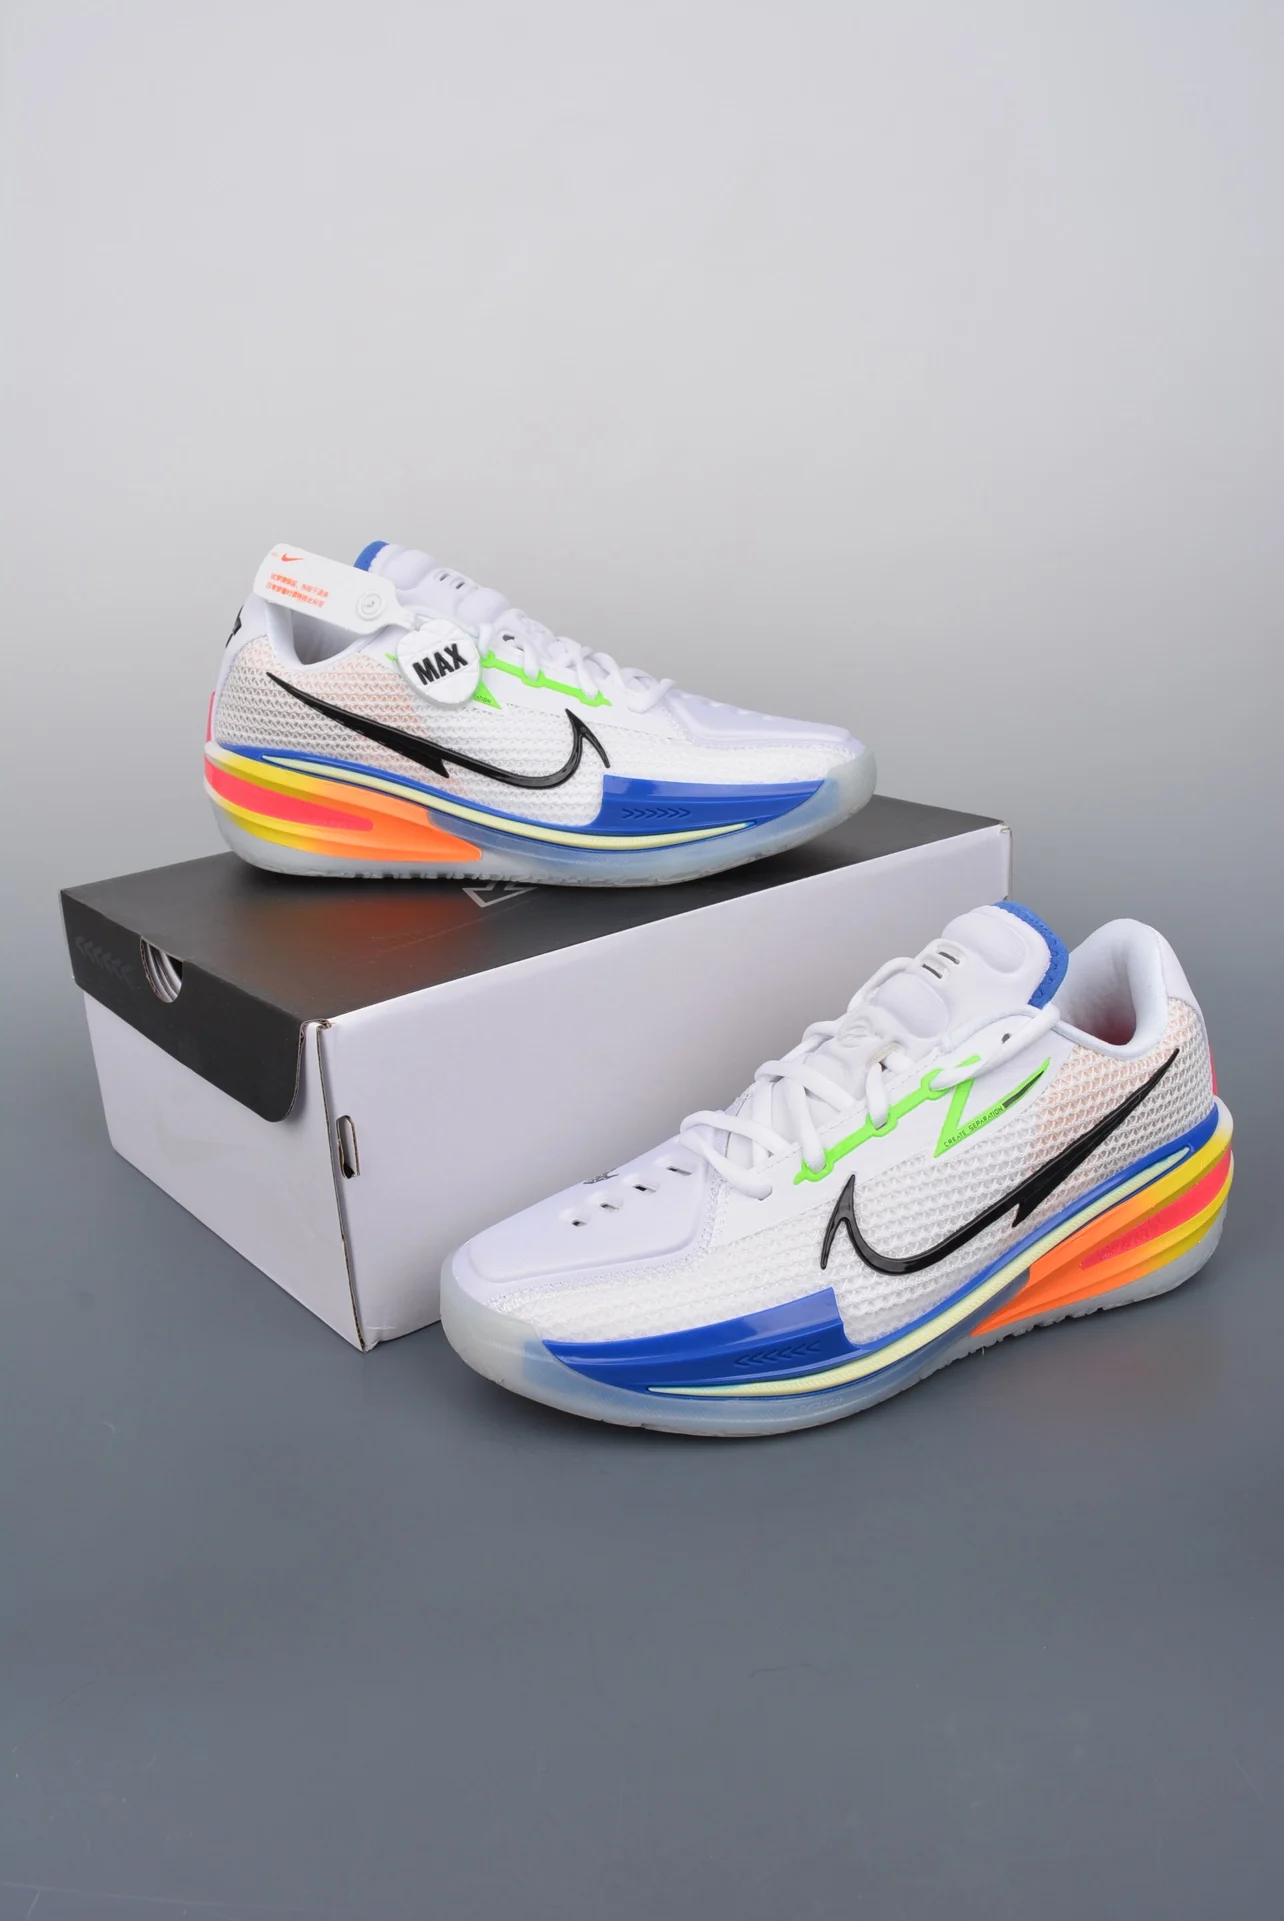 2022 Nike Air Zoom G.t.cut Cz0176-003 Ghost Zoom Sport Sneakers Nike Shoes - Buy Slim Sports Shoes,Running Shoes,Alive Shoes Product on Alibaba.com